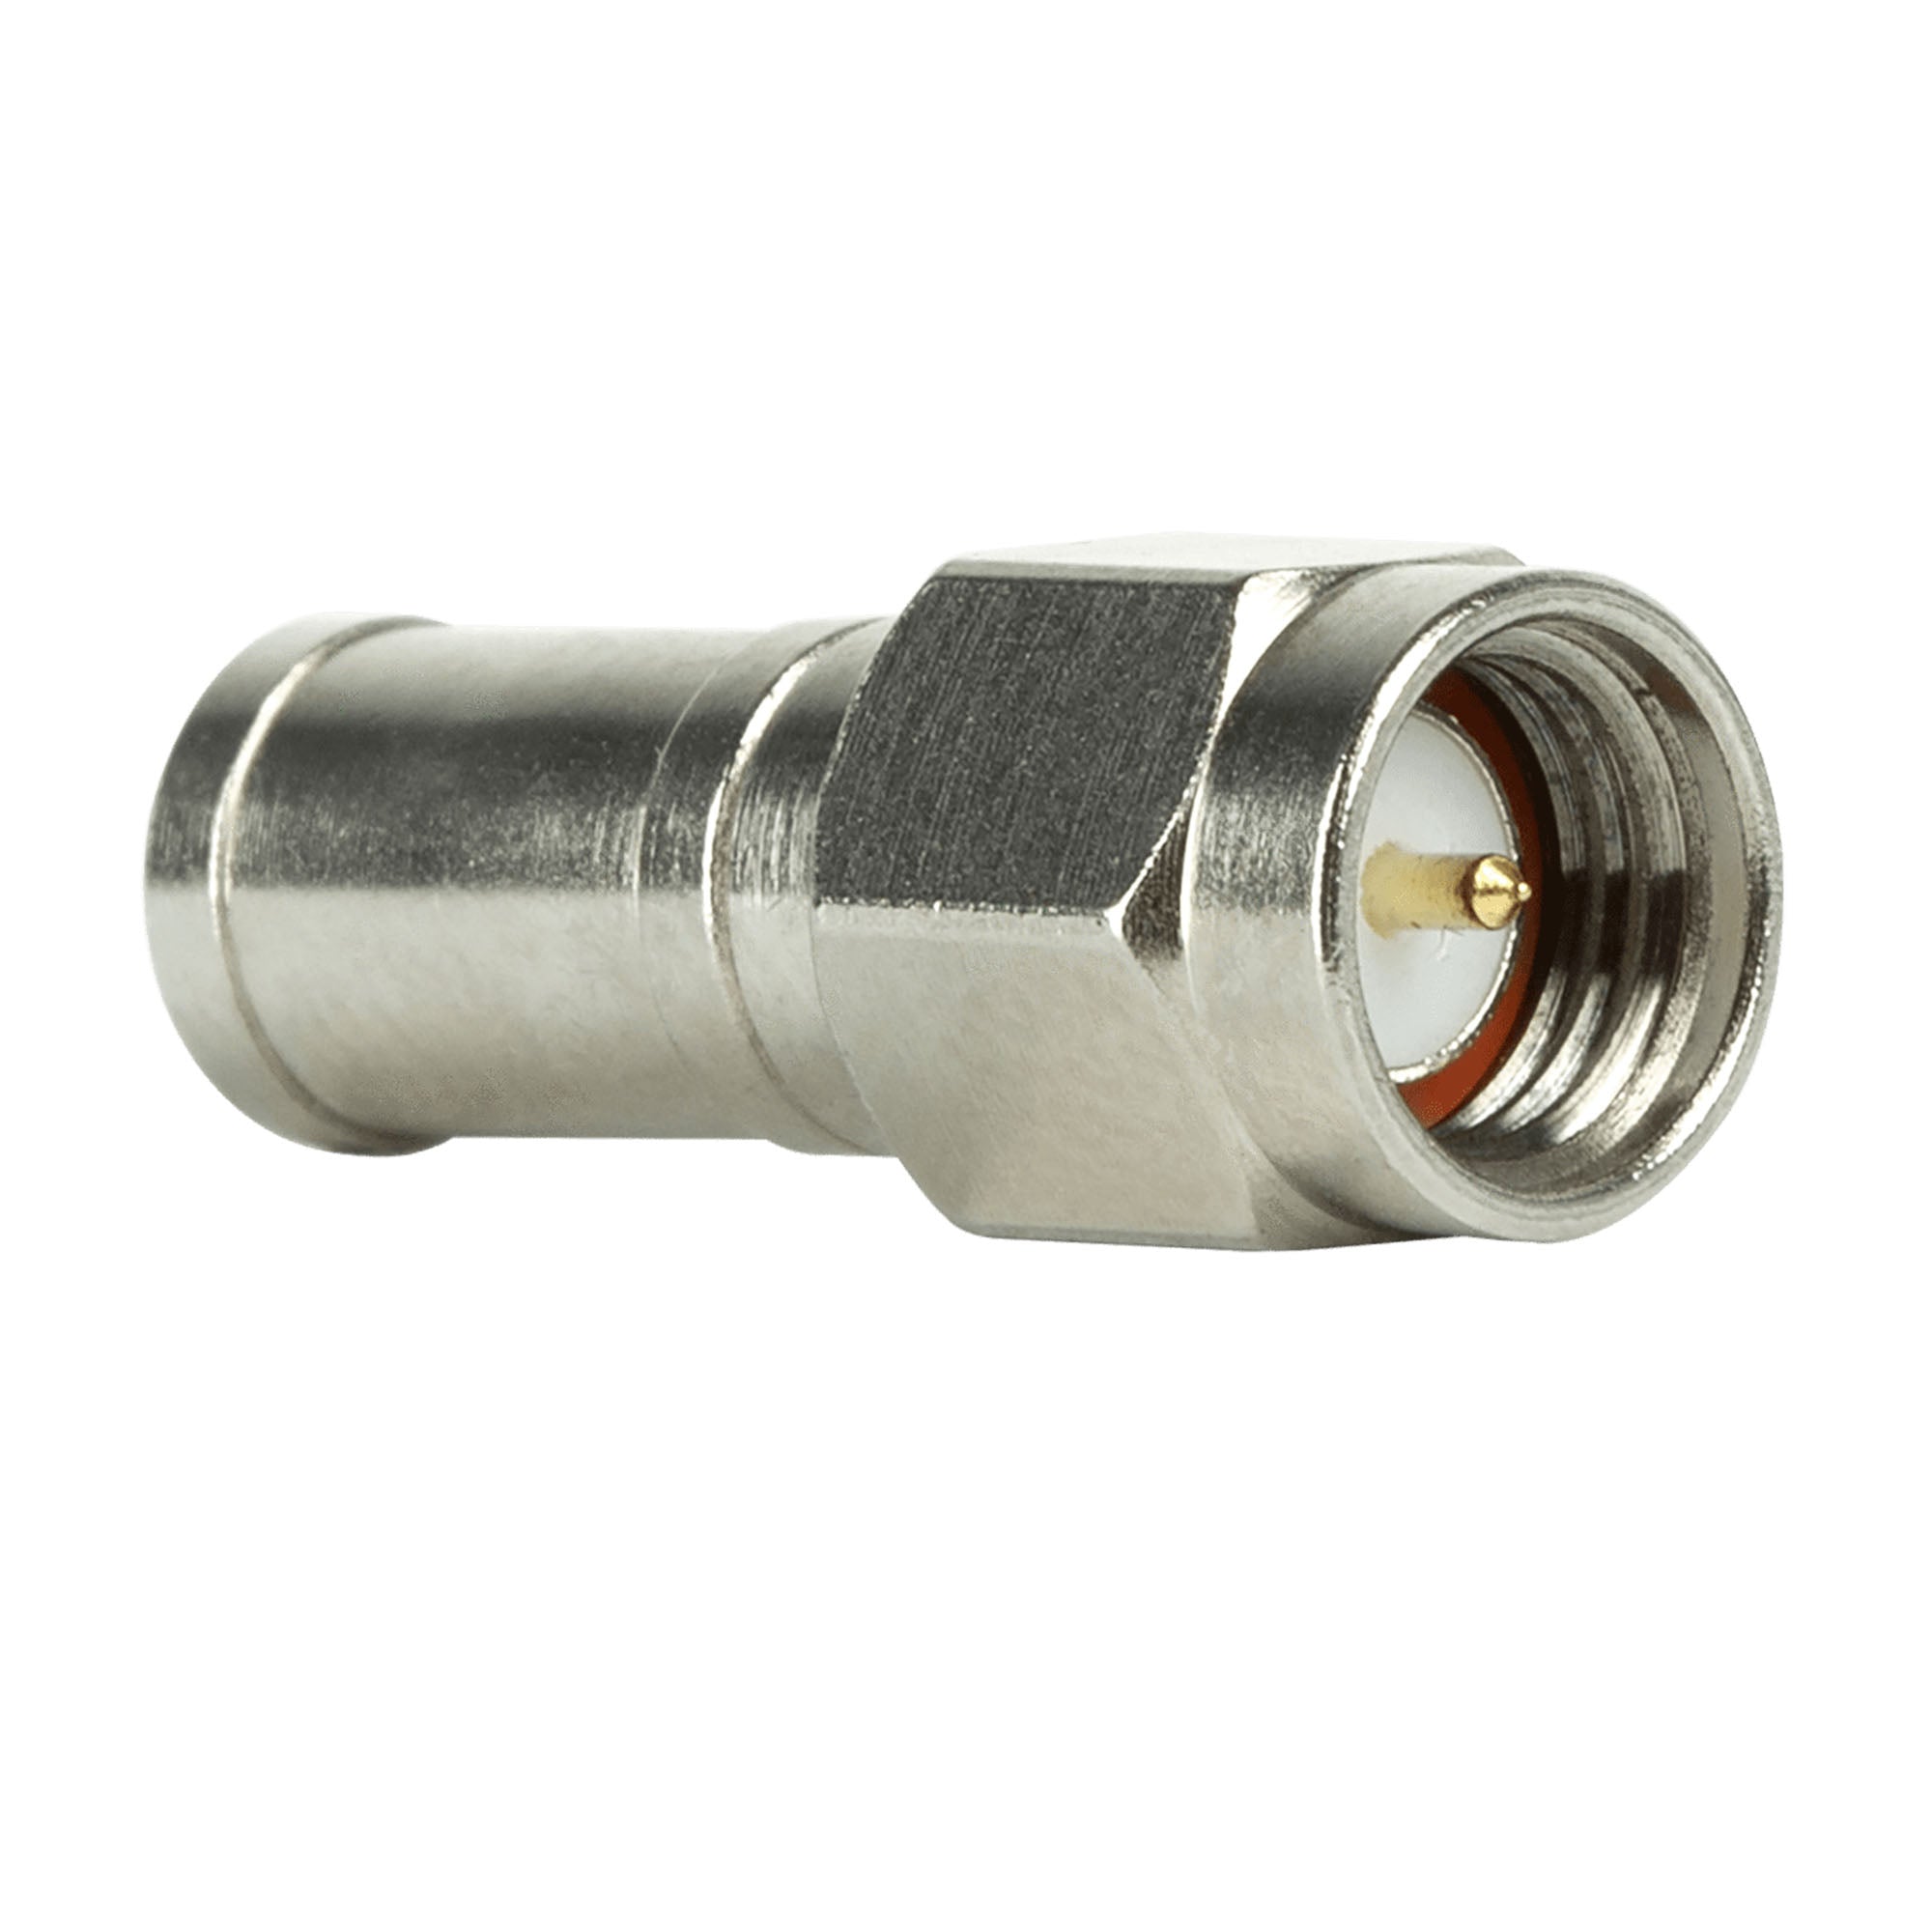 WeBoost SMB Plug to SMA Male Connector - 15-04700